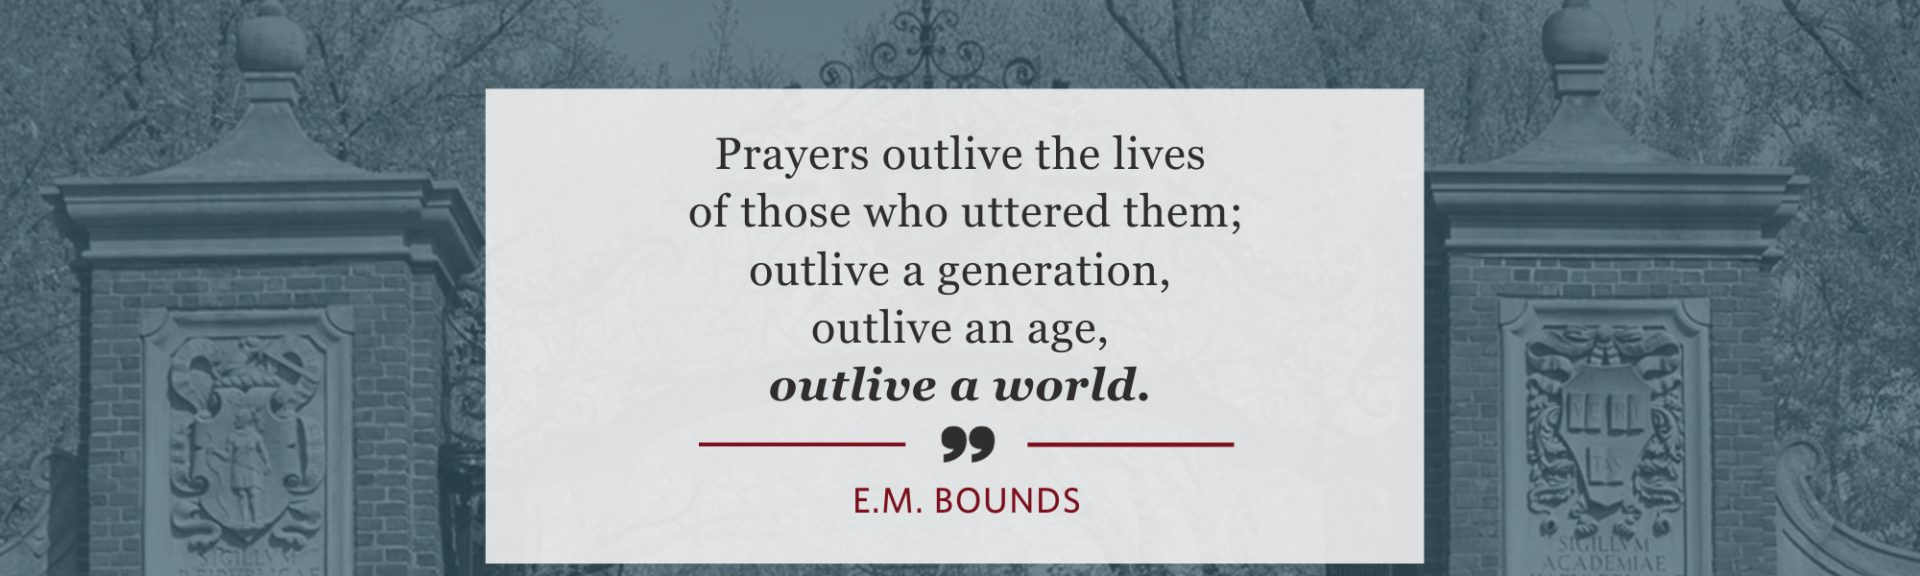 Prayers outlive the lives of those who uttered them; outlive a generation, outlive an age, outlive a world. - E.M. Bounds